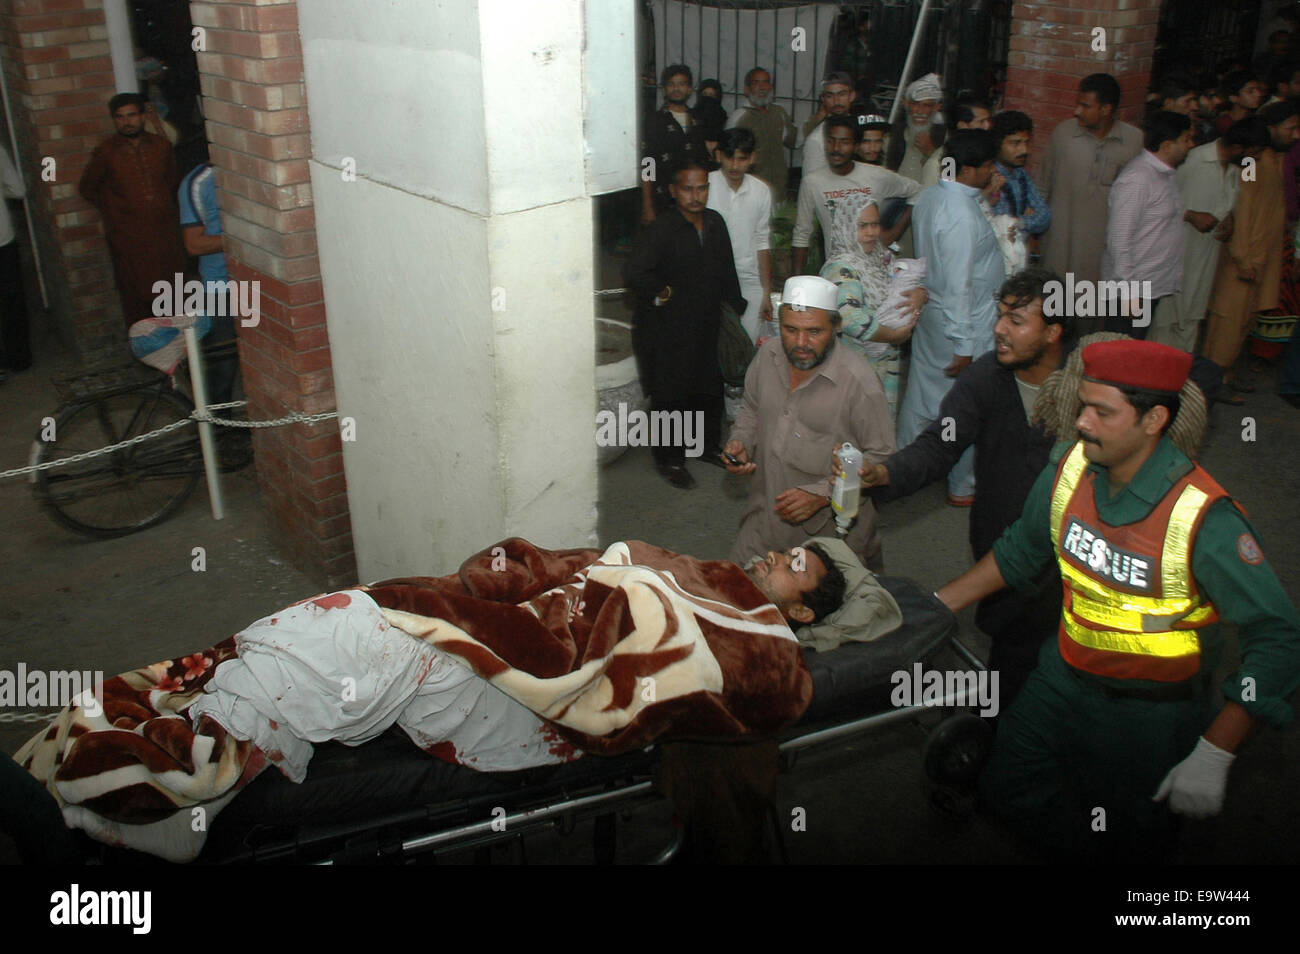 Lahore. 2nd Nov, 2014. People transfer an injured man to a hospital in eastern Pakistan's Lahore on Nov. 2, 2014. Death toll rose to 54 and over 100 others were injured in the Sunday evening's suicide blast that took place near Wagah border crossing in Pakistan's eastern city of Lahore, hospital sources said. Credit:  Sajjad/Xinhua/Alamy Live News Stock Photo